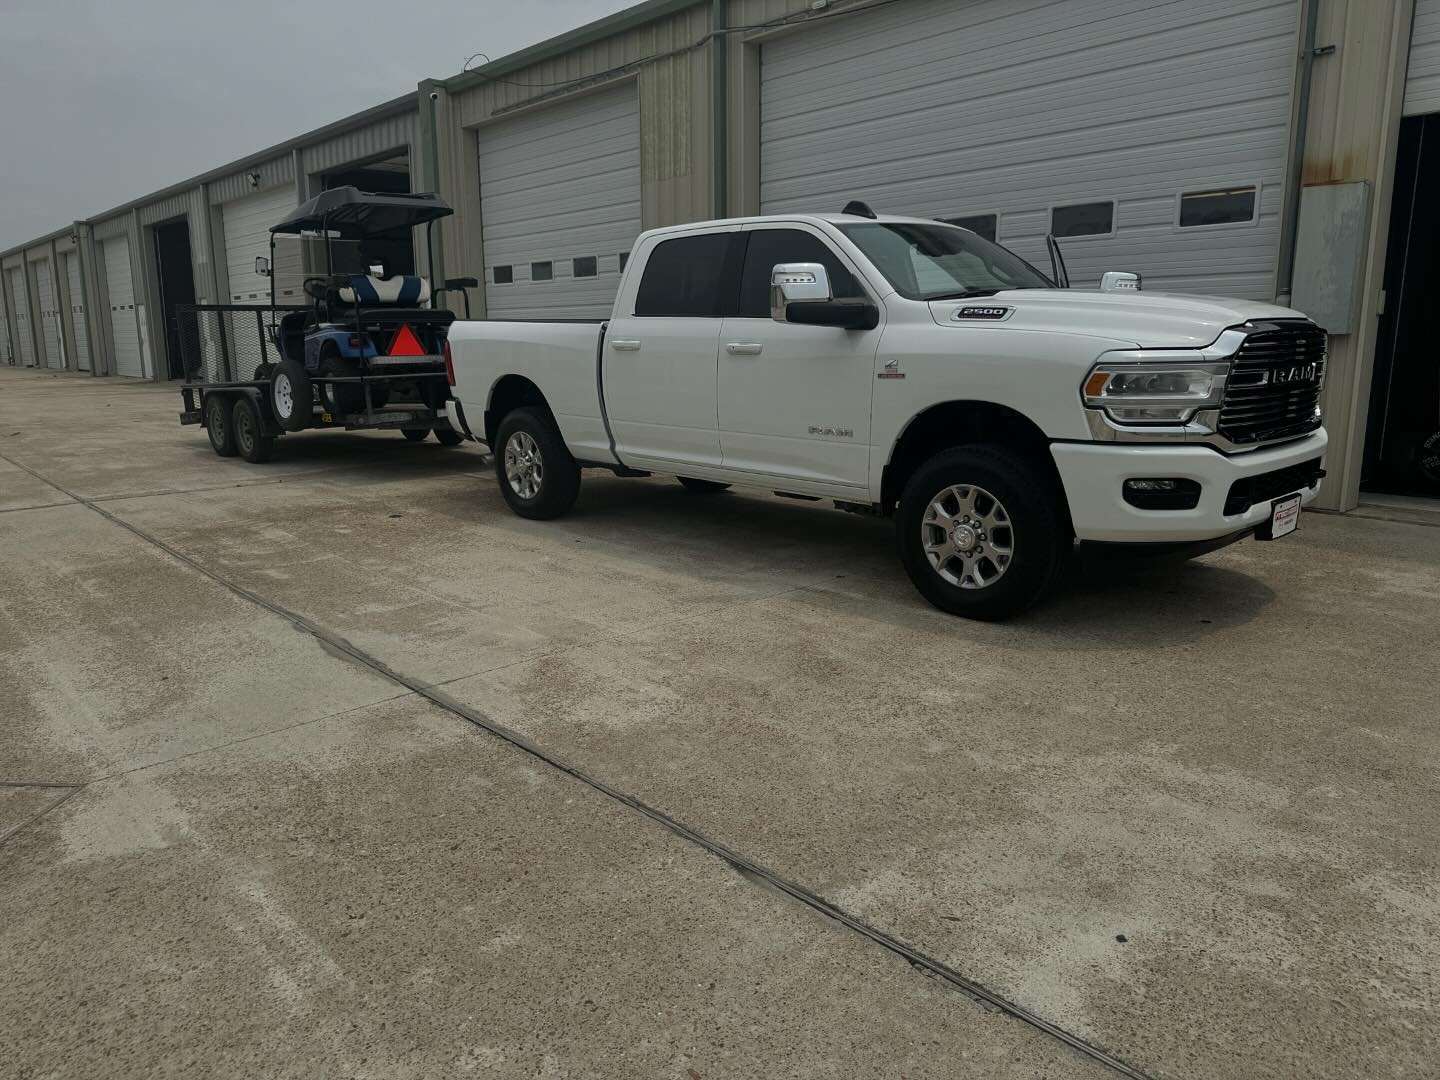 Dad made his first pick up and delivery for 3JL Rentals! If yall see him say hi! He&rsquo;s usually always in a great mood! Thanks again for your hard work.